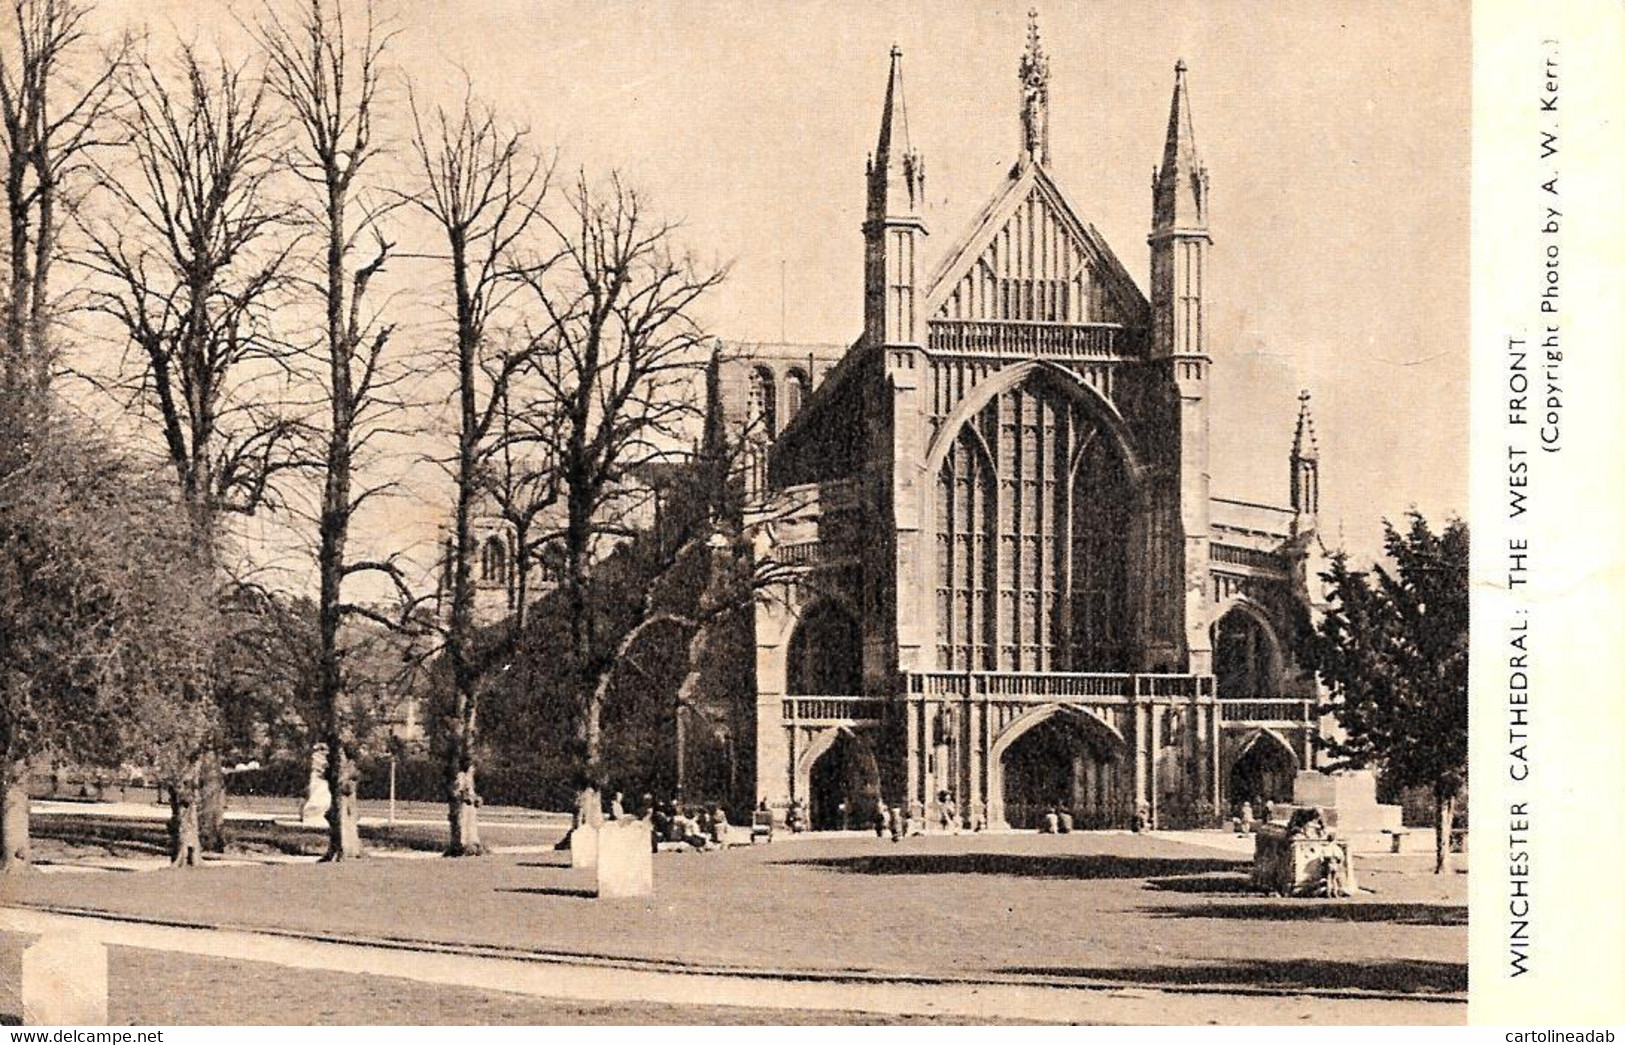 [DC12893] CPA - WINCHESTER CATHEDRAL - THE WEST FRONT - Viaggiata 1949 - Old Postcard - Winchester